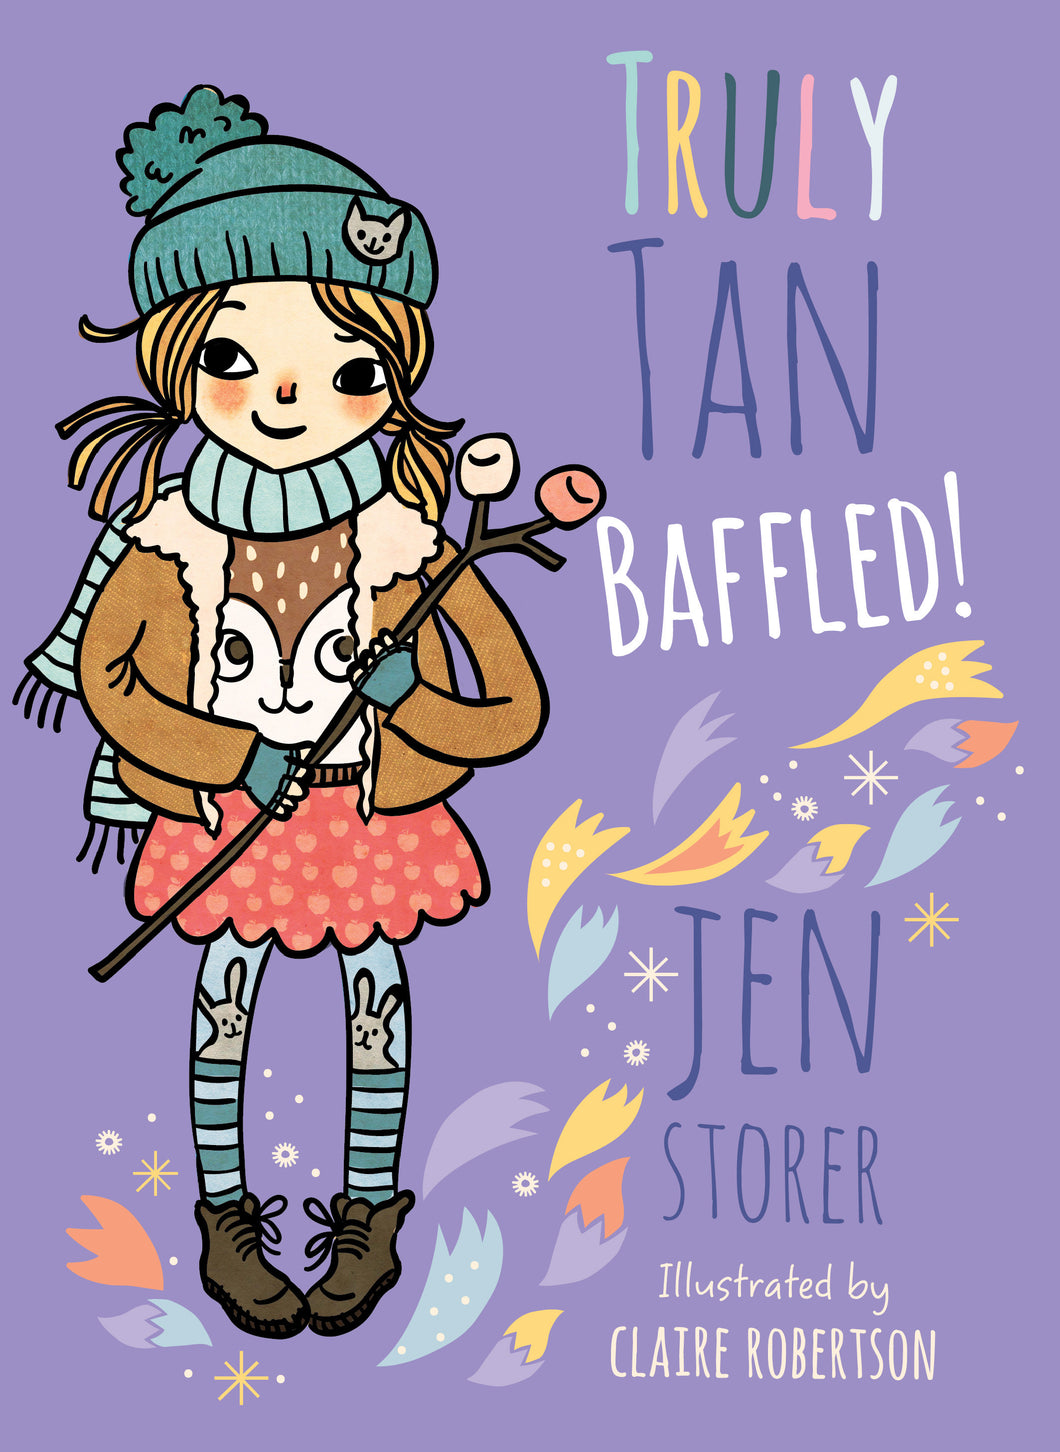 Truly Tan Baffled! by Jen Storer, illustrated by Claire Robertson